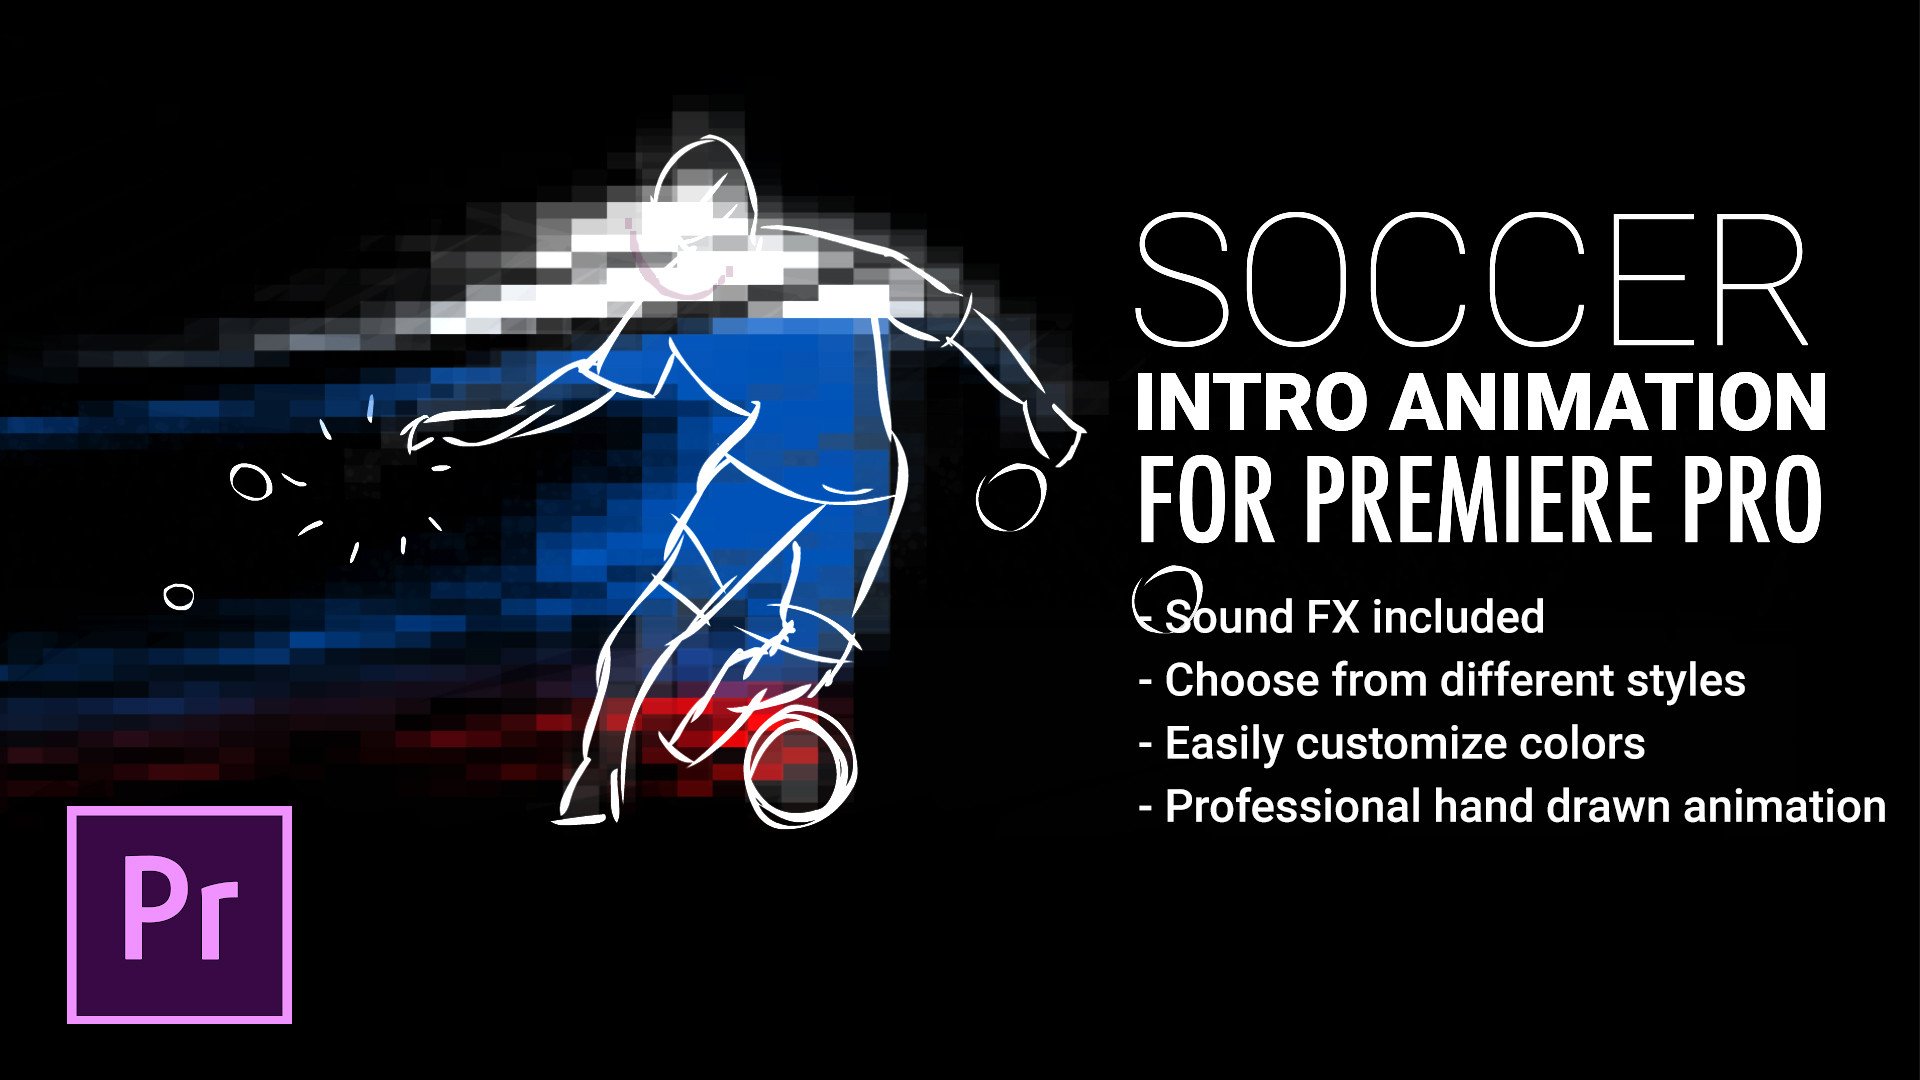 Soccer Intro Animation For Premiere Pro by snowcake